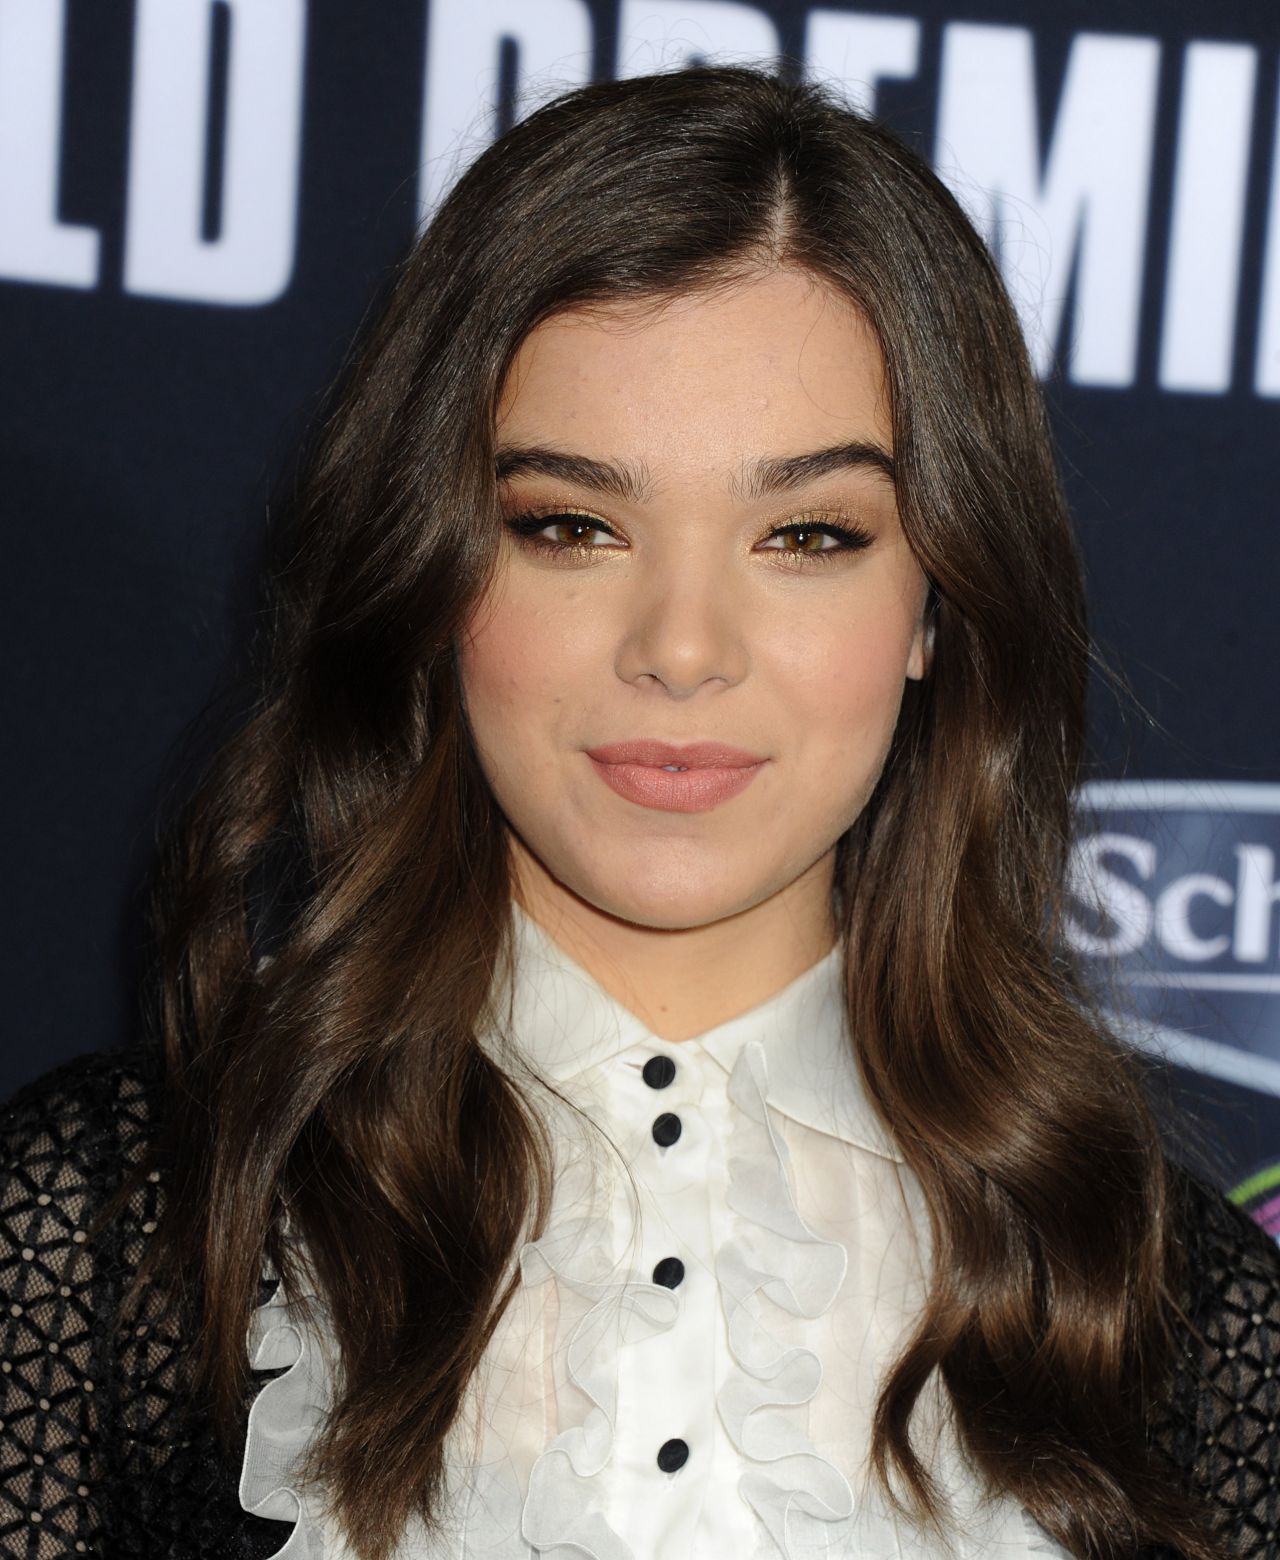 Hailee Steinfeld – Pitch Perfect 2 Premiere in Los Angeles